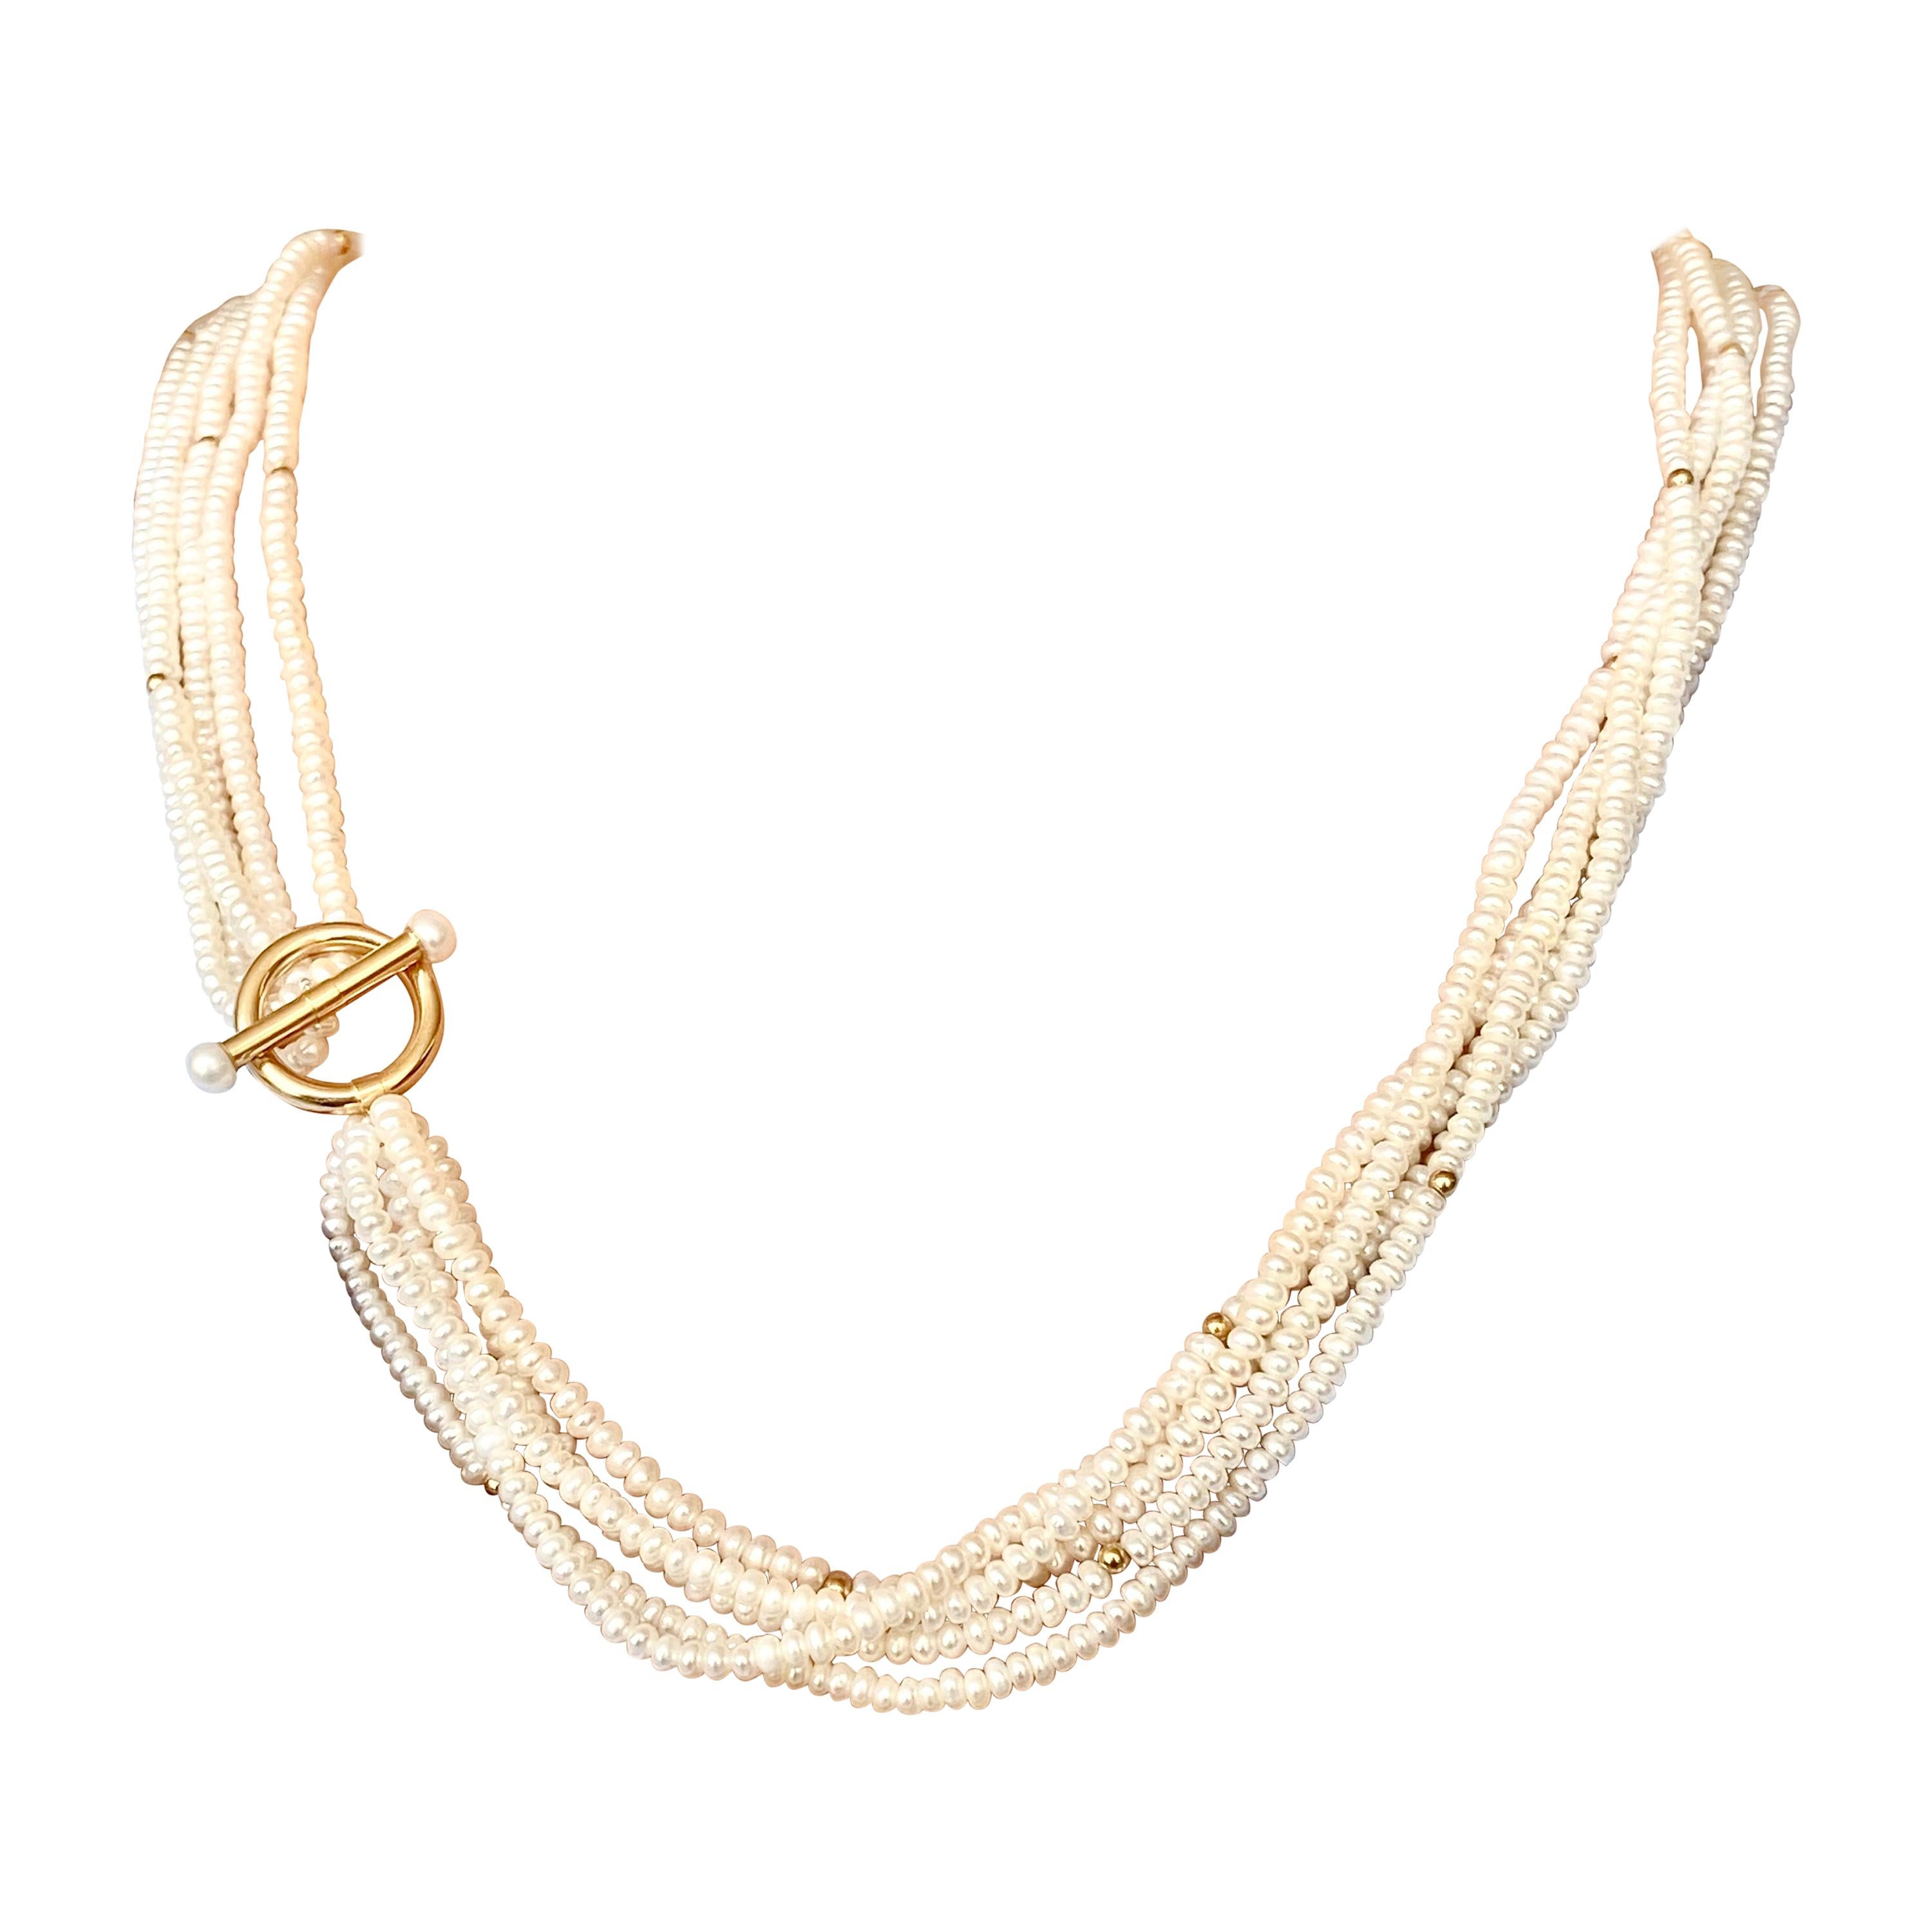 Pearl Strand Necklace with 14k Gold Toggle Clasp Genuine Freshwater Pearl Chains